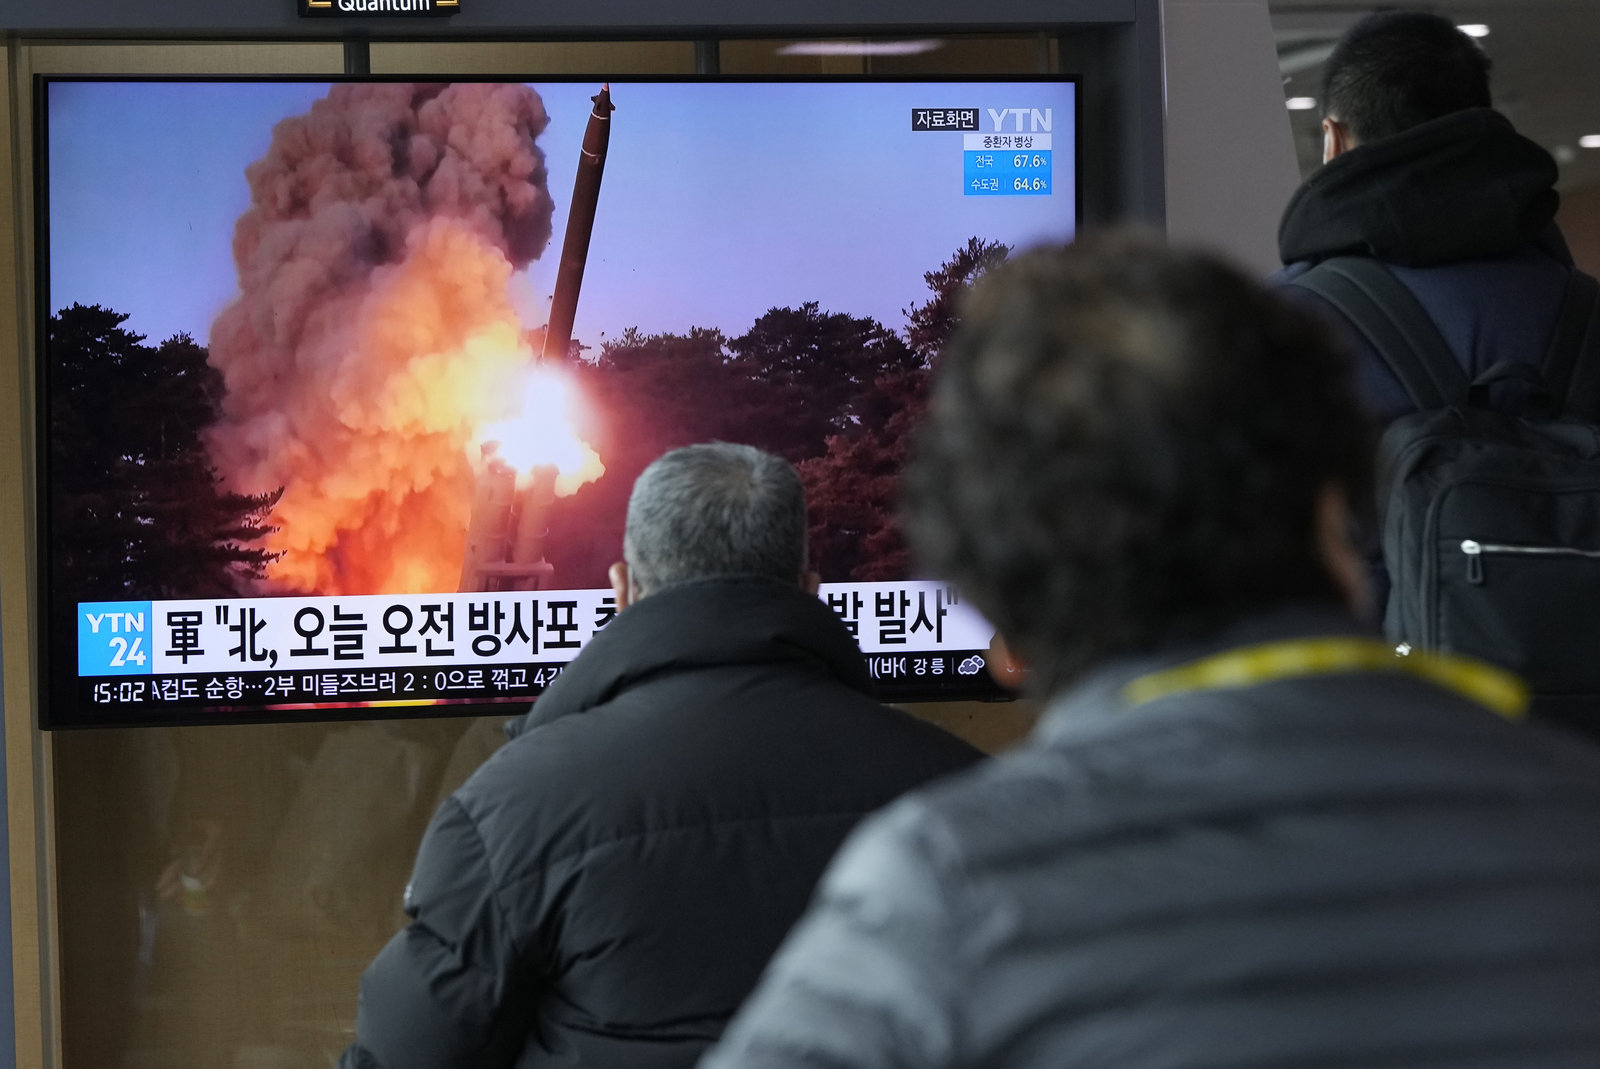 North Korea fires artillery into sea days after failed missile launch, South Korea says